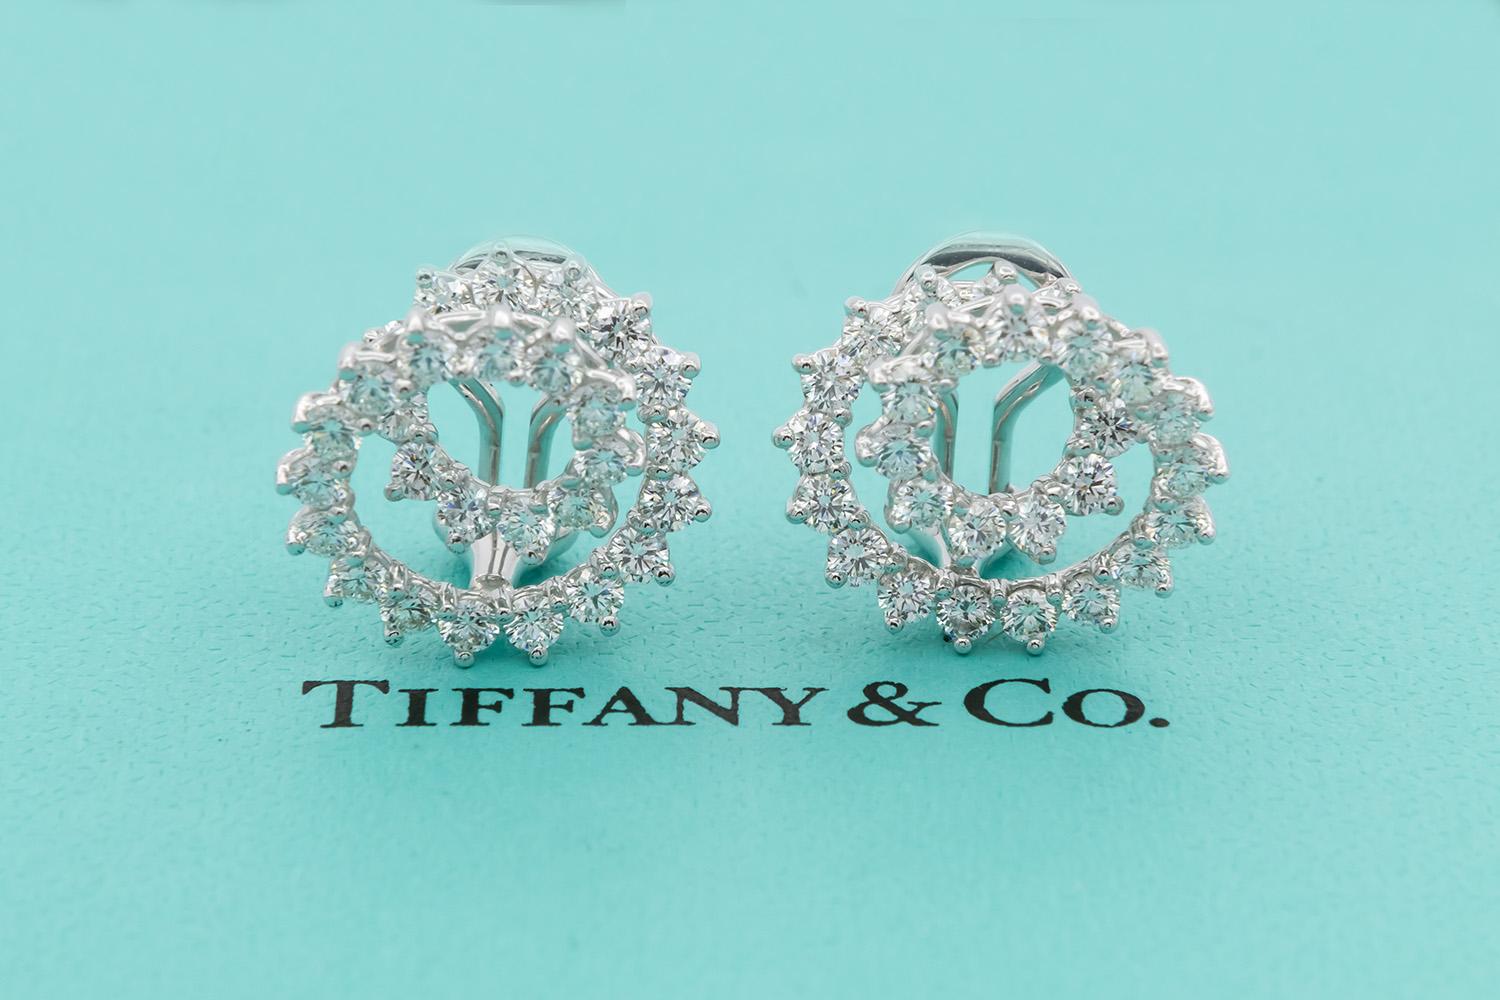 We are pleased to present these Tiffany & Co. Mini Swirl Earrings. These beautiful earrings feature a unique spiral swirl design, set with an estimated 2.54ctw F-G/VS-SI round brilliant cut diamonds and fashioned from platinum with a clip style